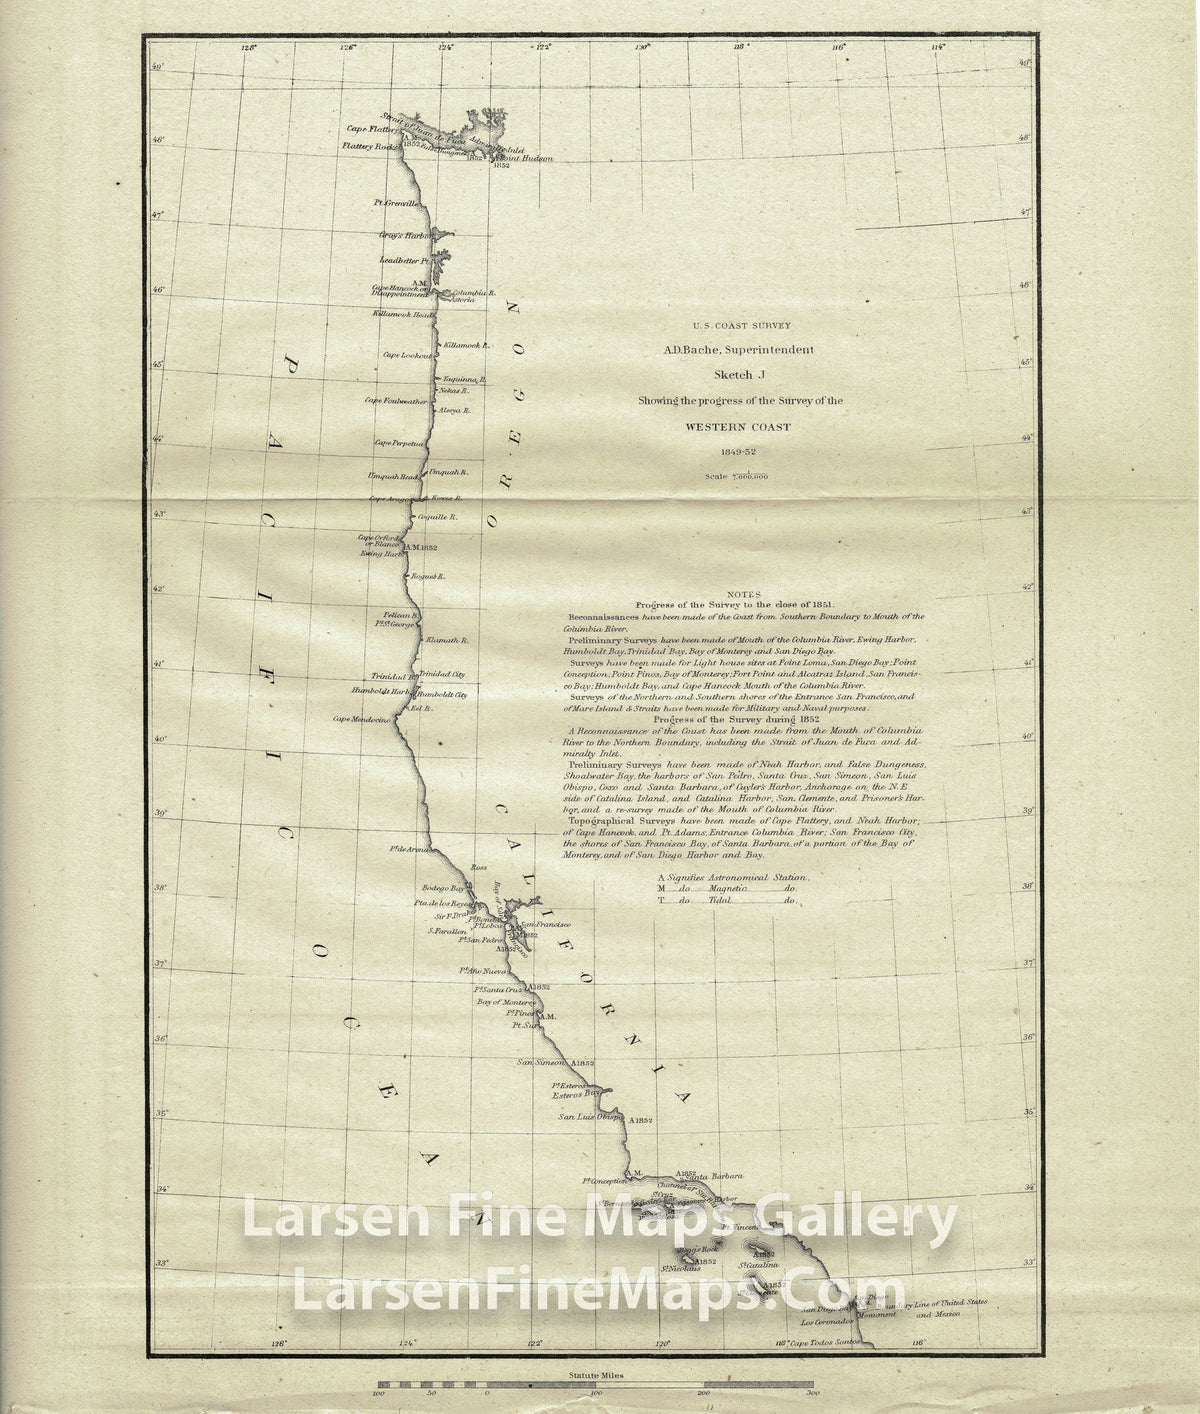 Sketch J Showing the Progress of the Survey of the Western Coast 1849-52